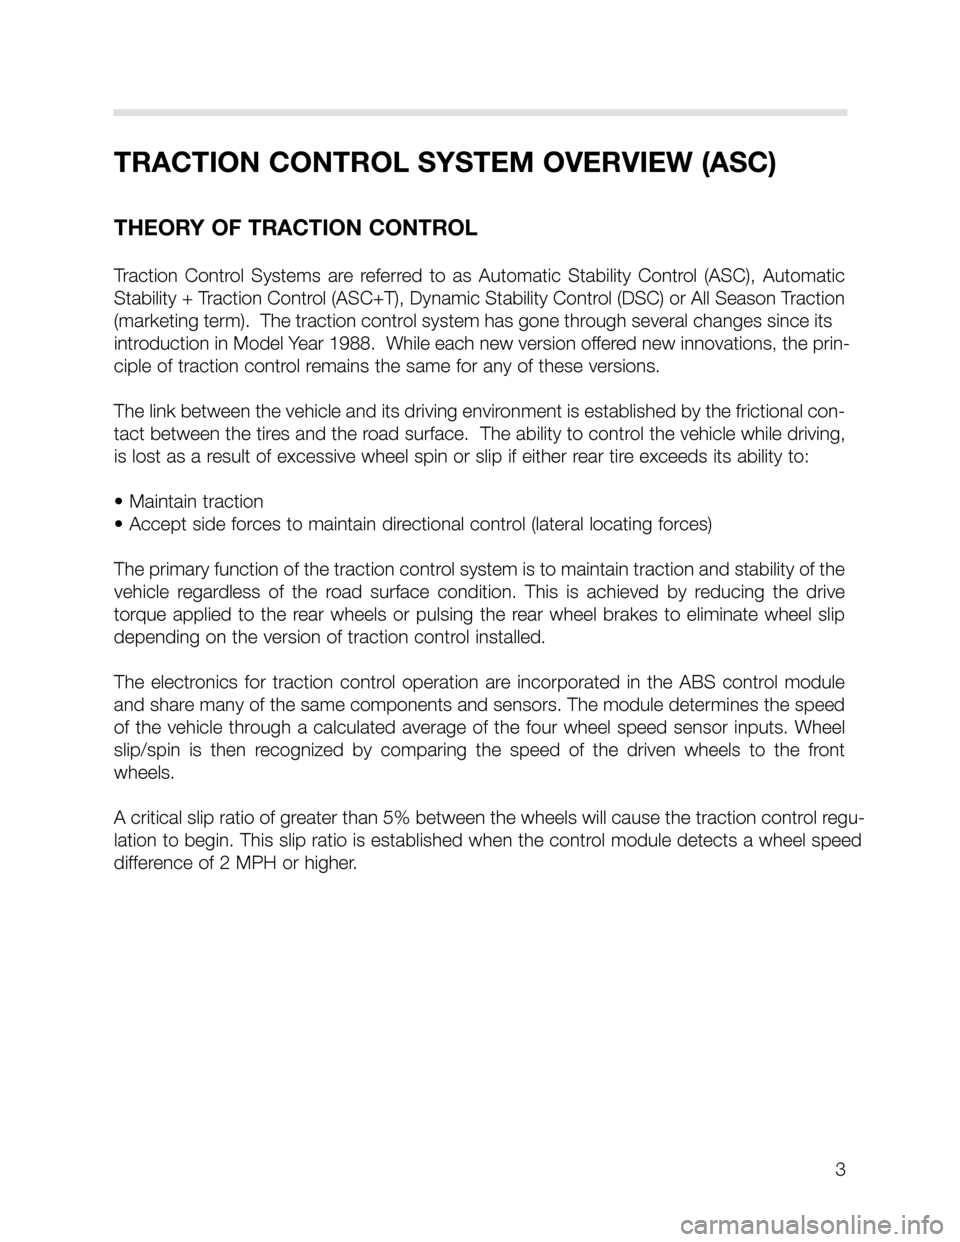 BMW X5 2002 E53 DSC System Workshop Manual 3
TRACTION CONTROL SYSTEM OVERVIEW (ASC)
THEORY OF TRACTION CONTROL
Traction  Control  Systems  are  referred  to  as  Automatic  Stability  Control  (ASC),  Automatic
Stability + Traction Control (AS